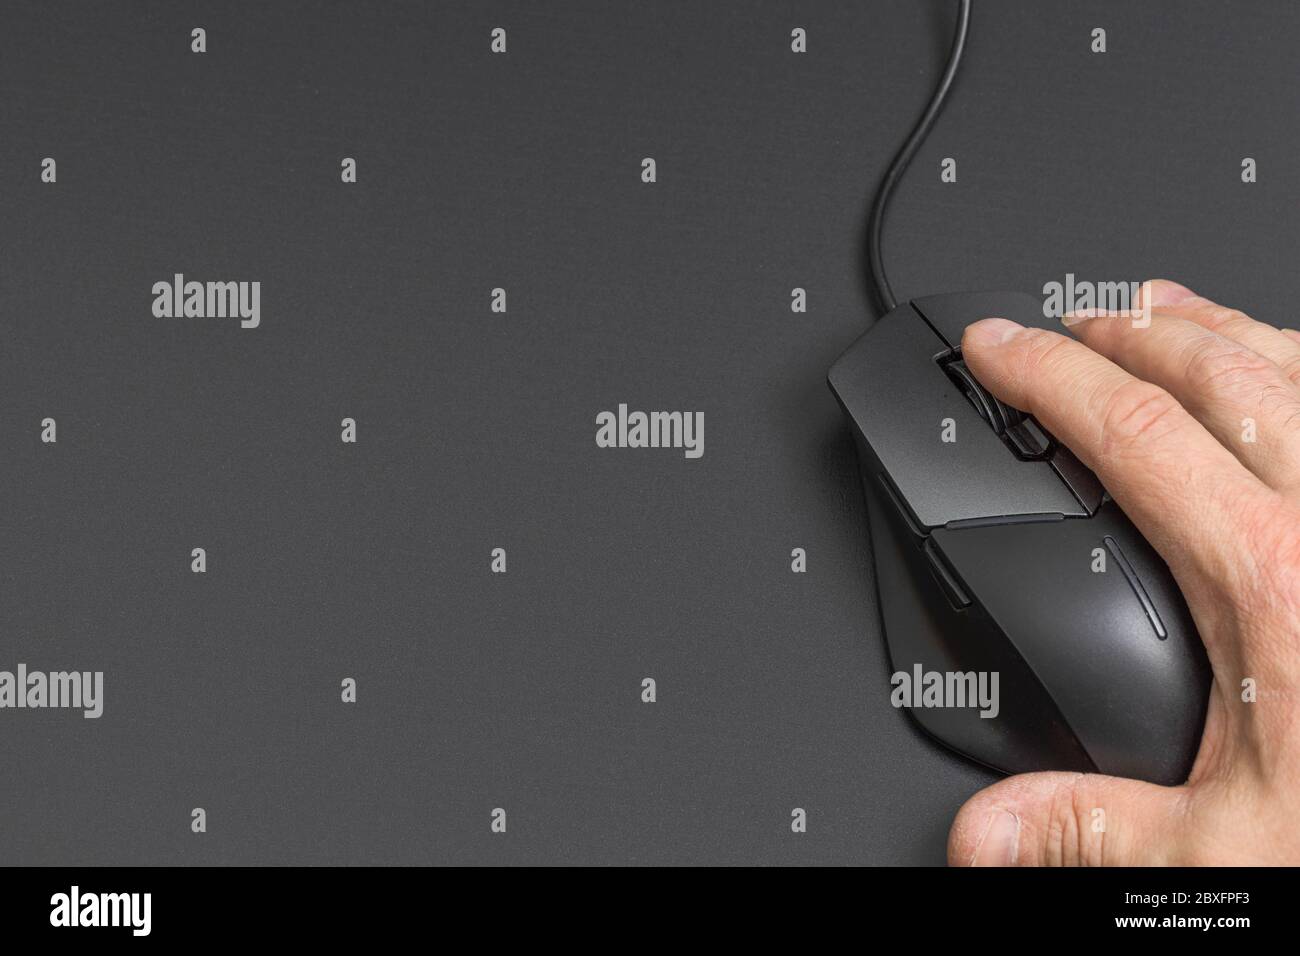 accessory, adult, background, black, black background, black board, body, body parts, business, business people, button, cable, click, close up, close Stock Photo